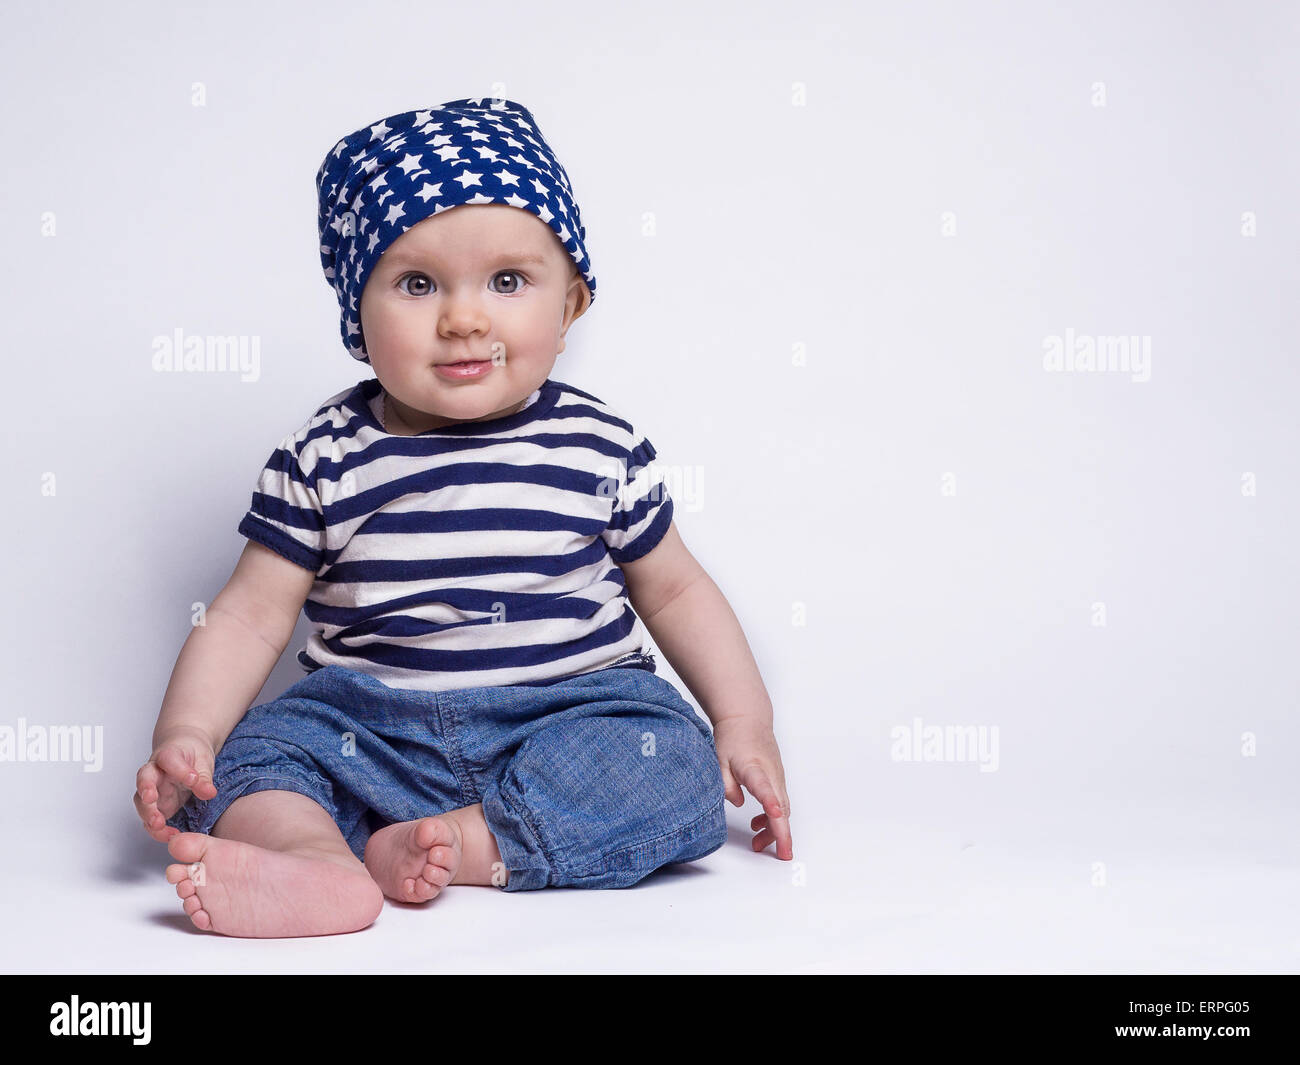 Smiling baby in cute outfit Stock Photo